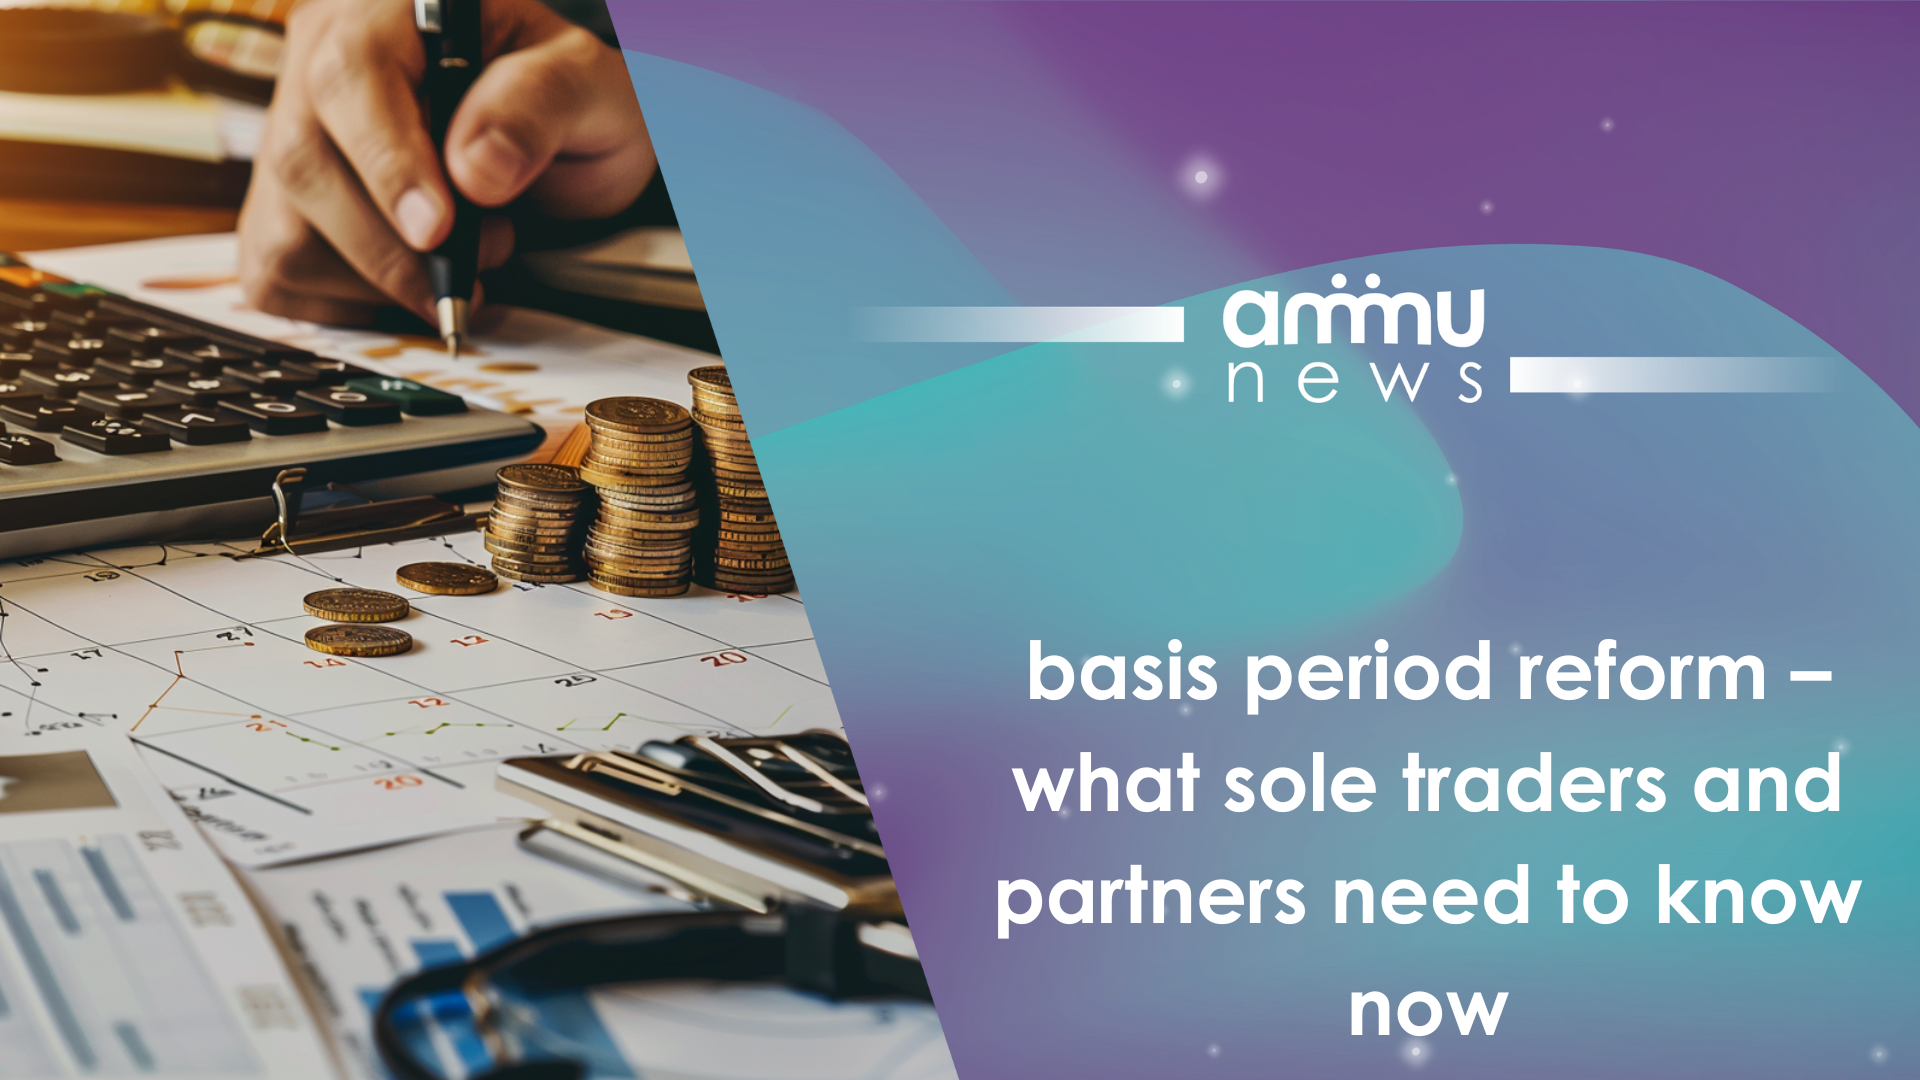 Basis period reform – what sole traders and partners need to know